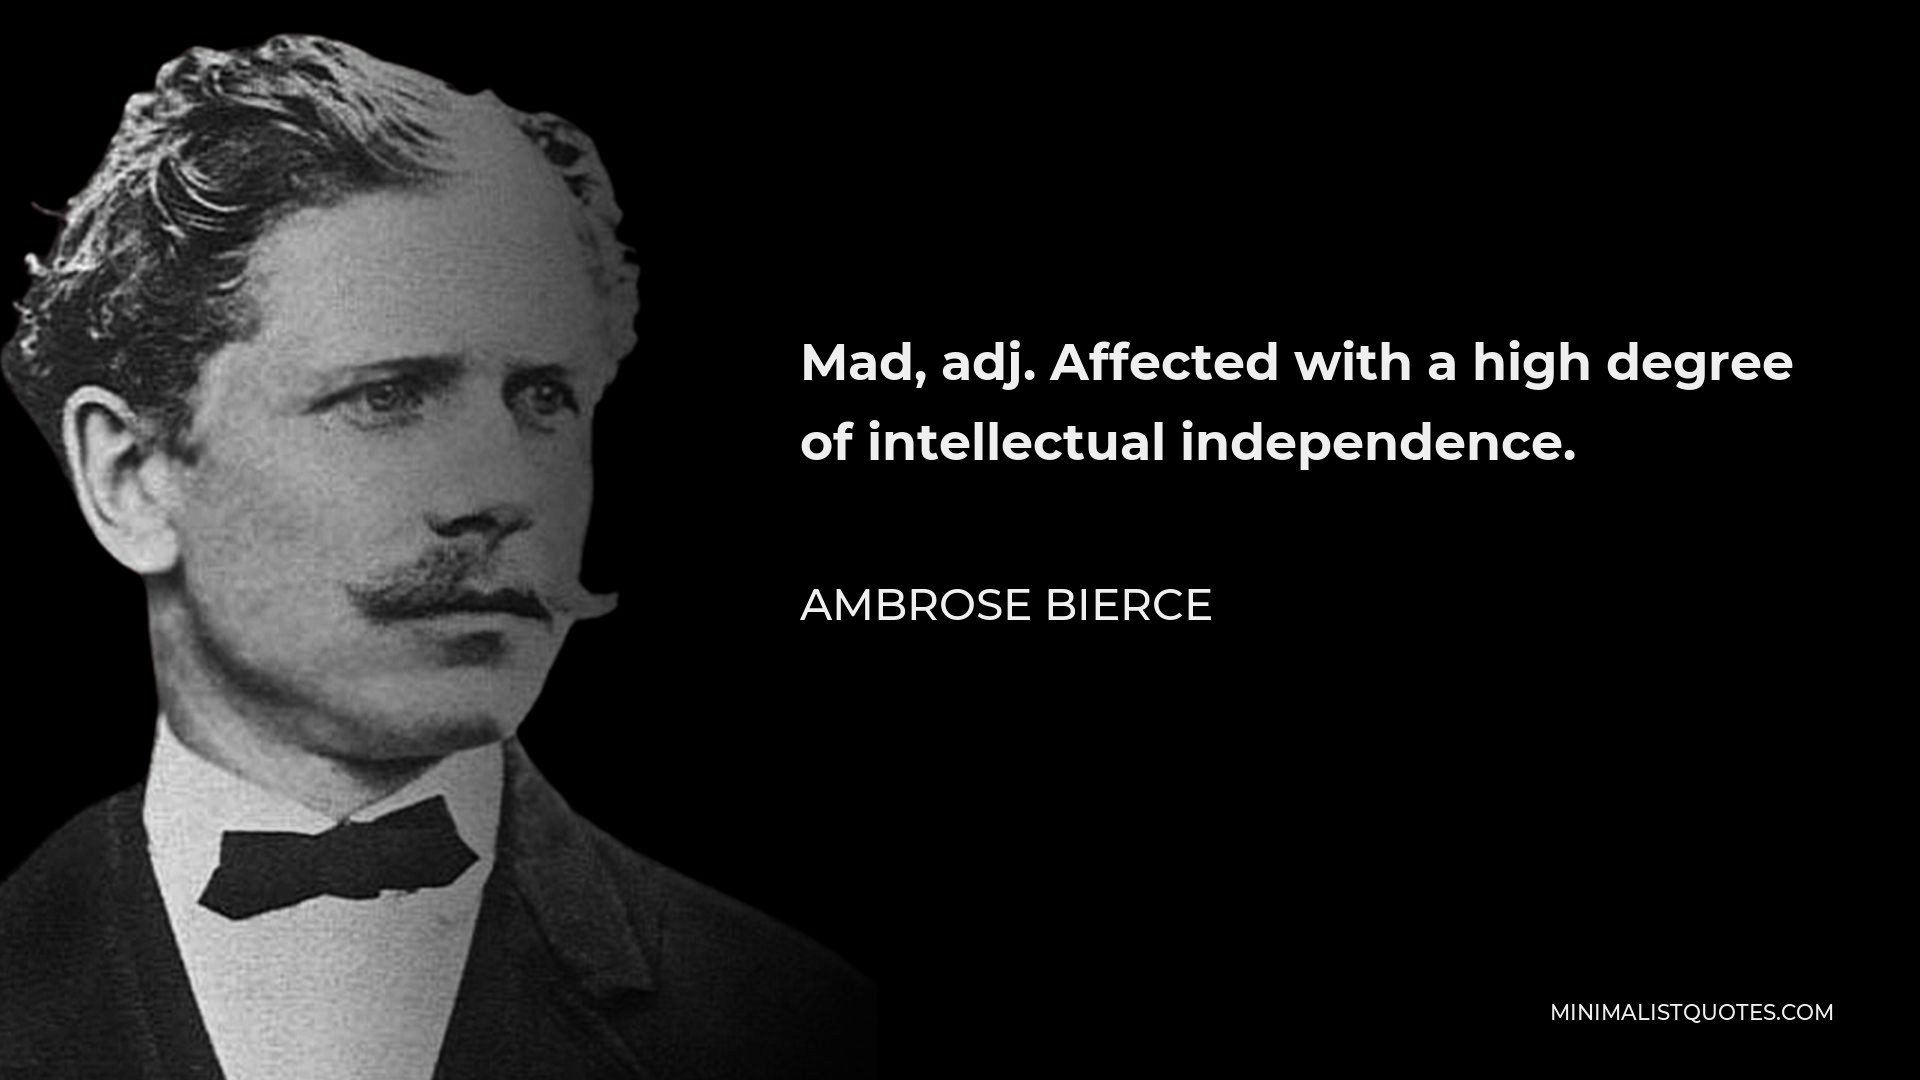 Ambrose Bierce Quote - Mad, adj. Affected with a high degree of intellectual independence.